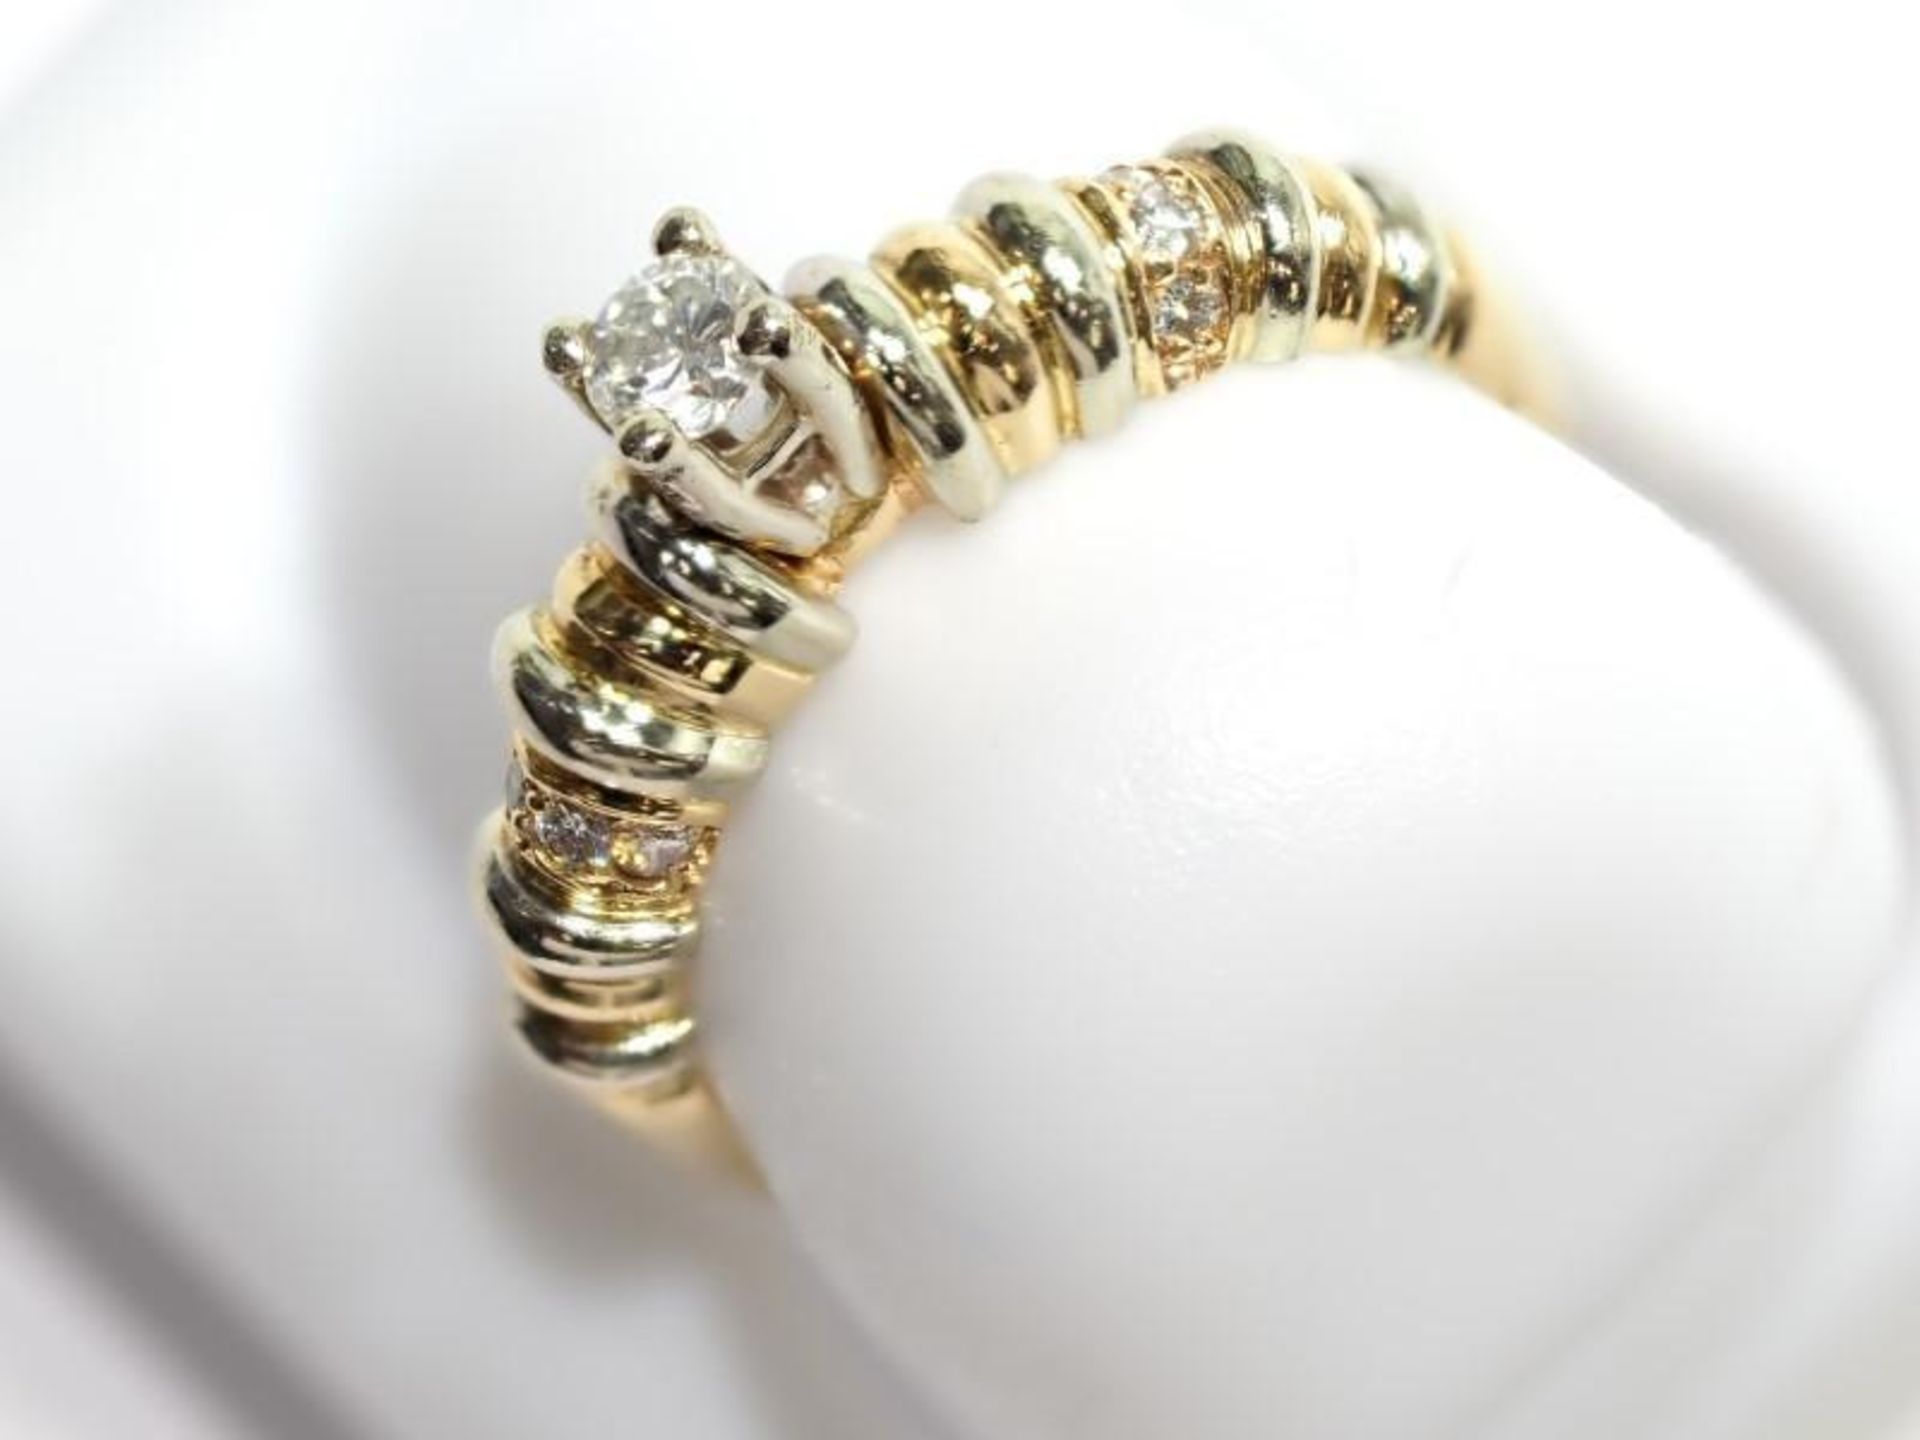 10K Yellow-White Gold Diamond (0.12ct) 8 Shoulder Diamond (0.08ct) Dome Style Patterned Ring. Insura - Image 2 of 4